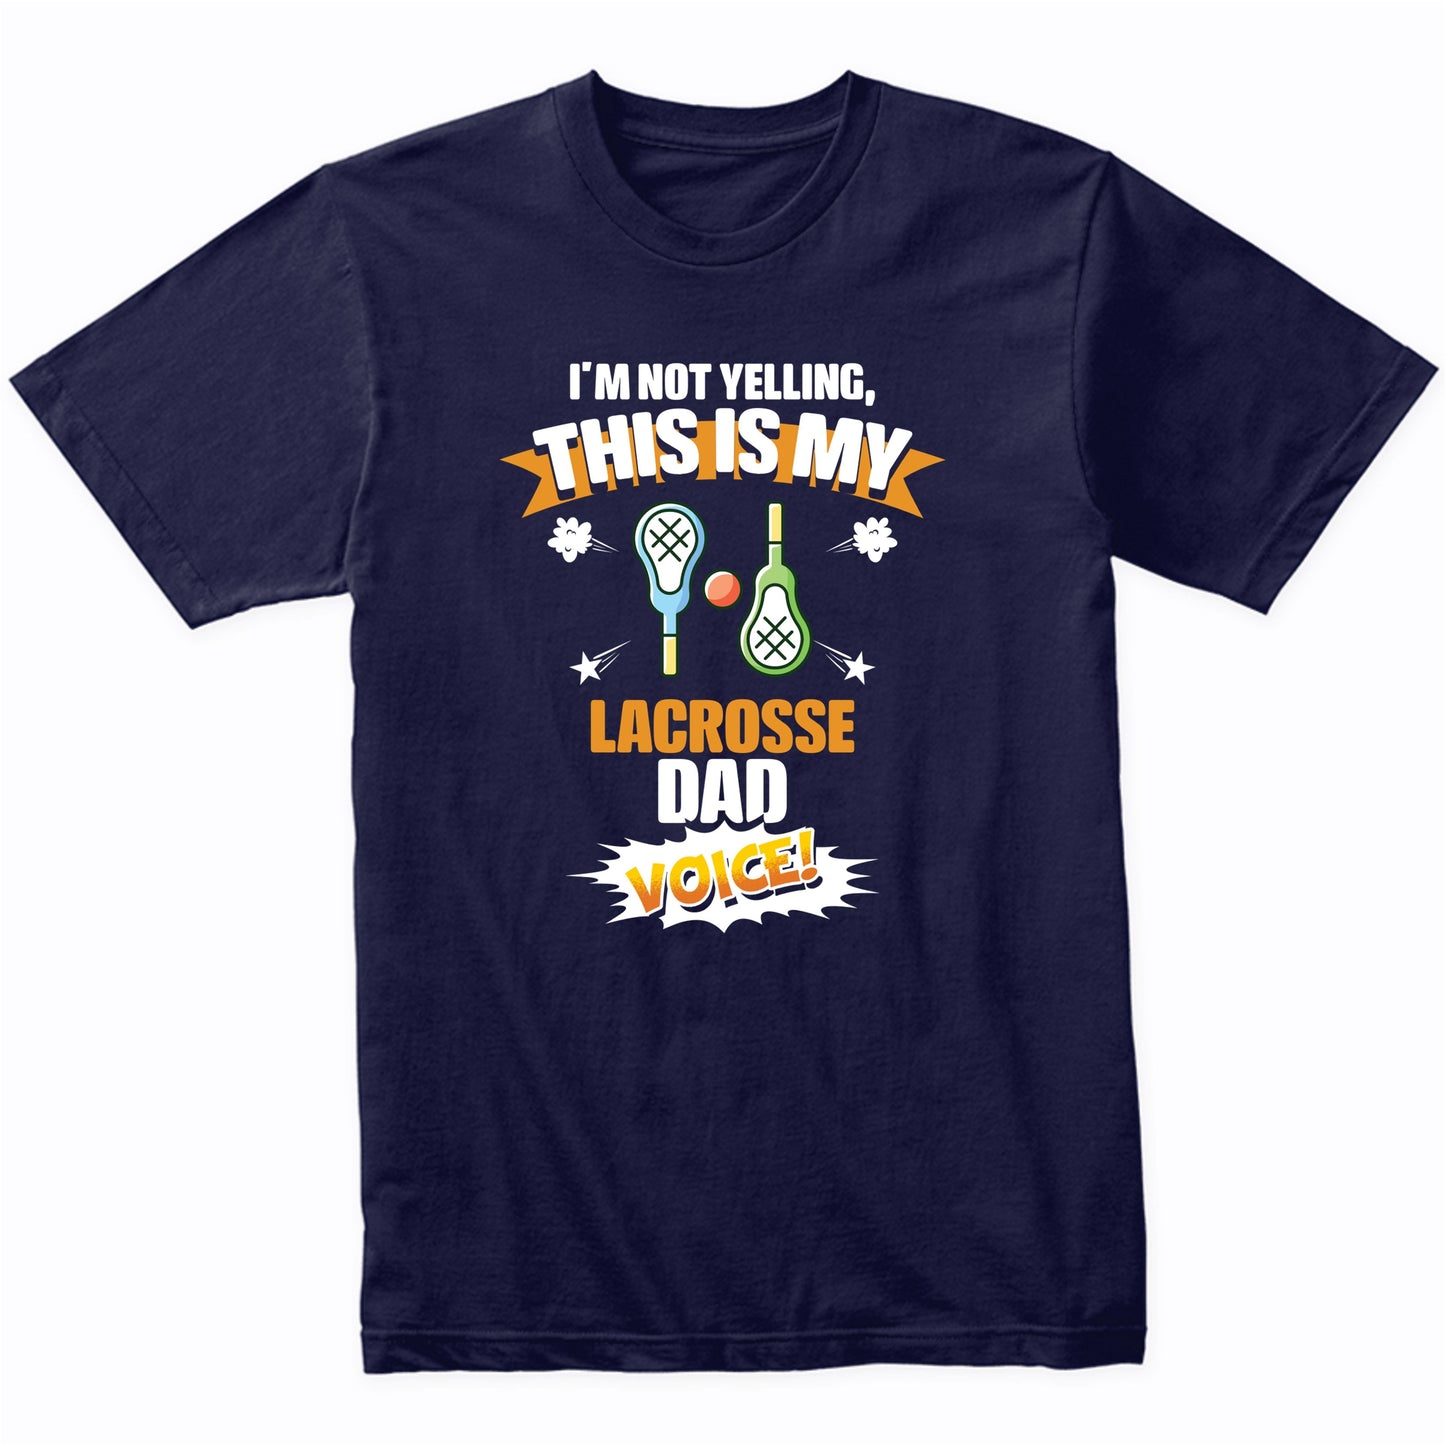 I'm Not Yelling This Is My Lacrosse Dad Voice Funny T-Shirt